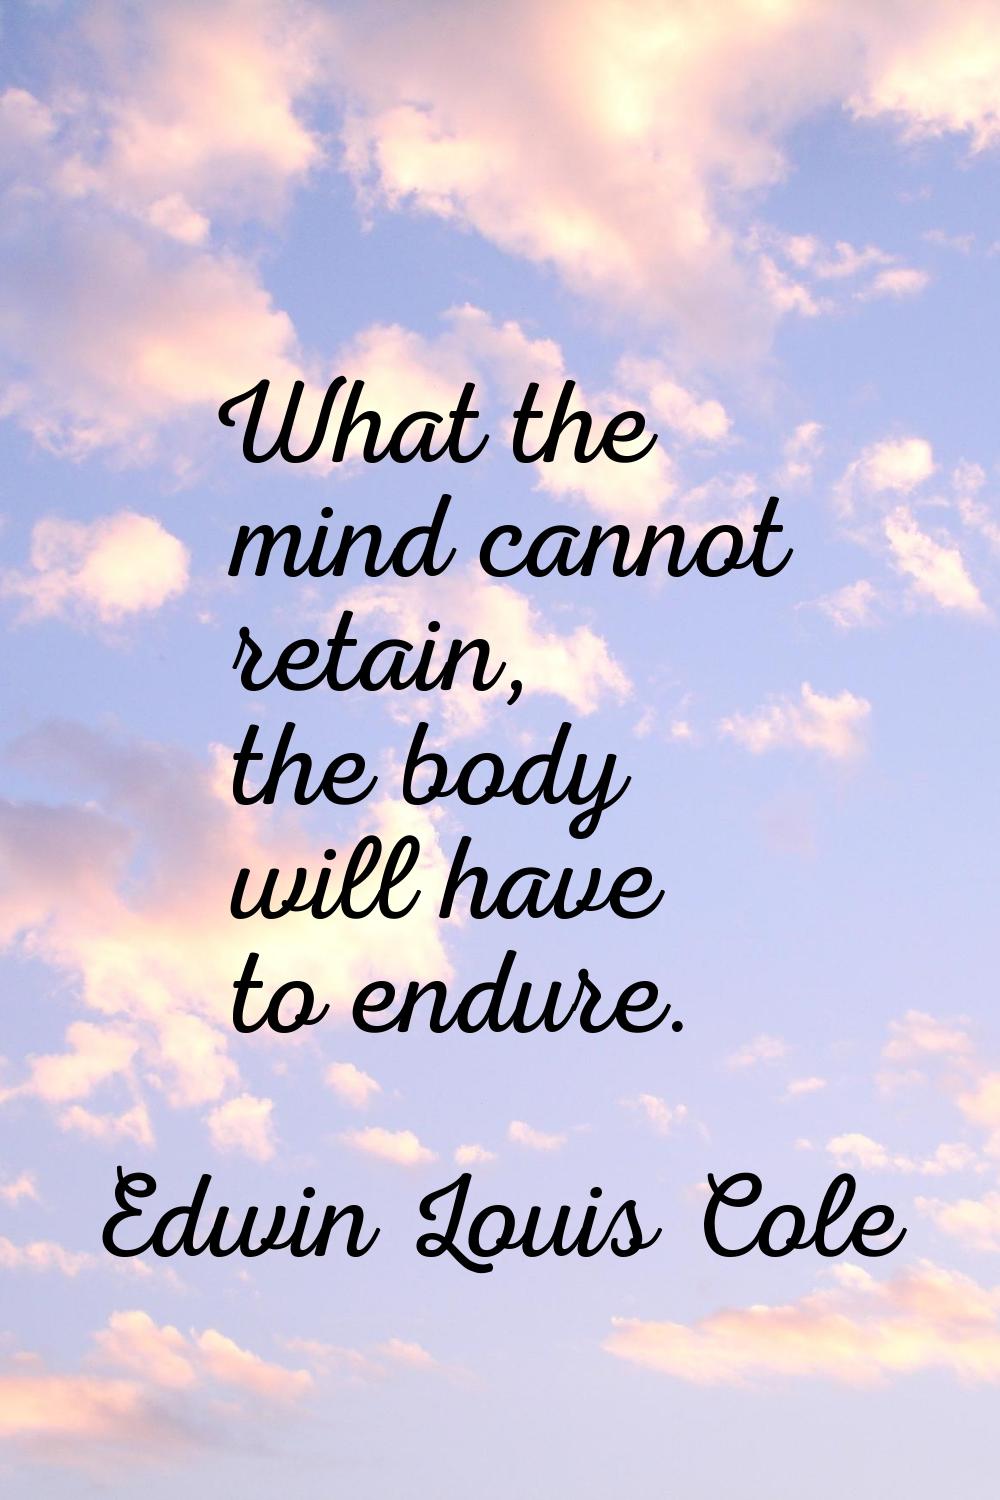 What the mind cannot retain, the body will have to endure.